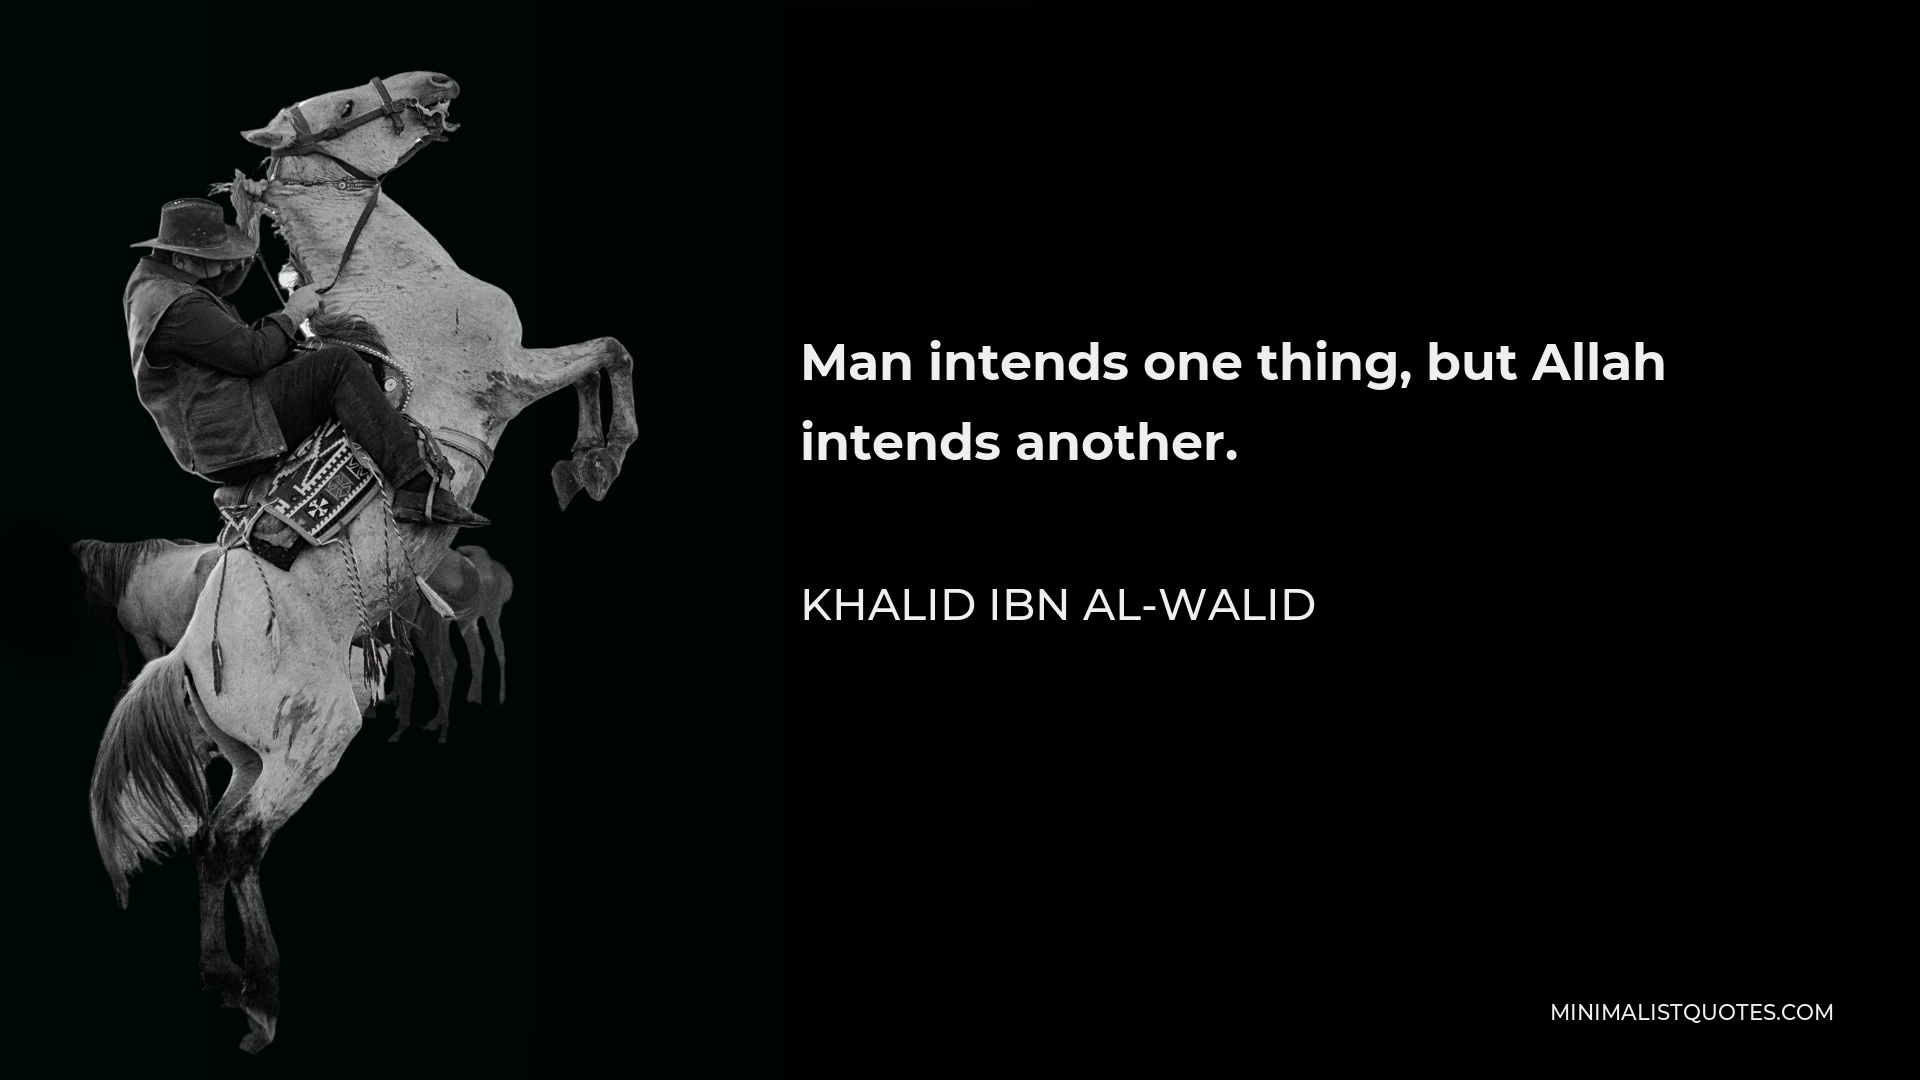 Khalid ibn al-Walid Quote - Man intends one thing, but Allah intends another.